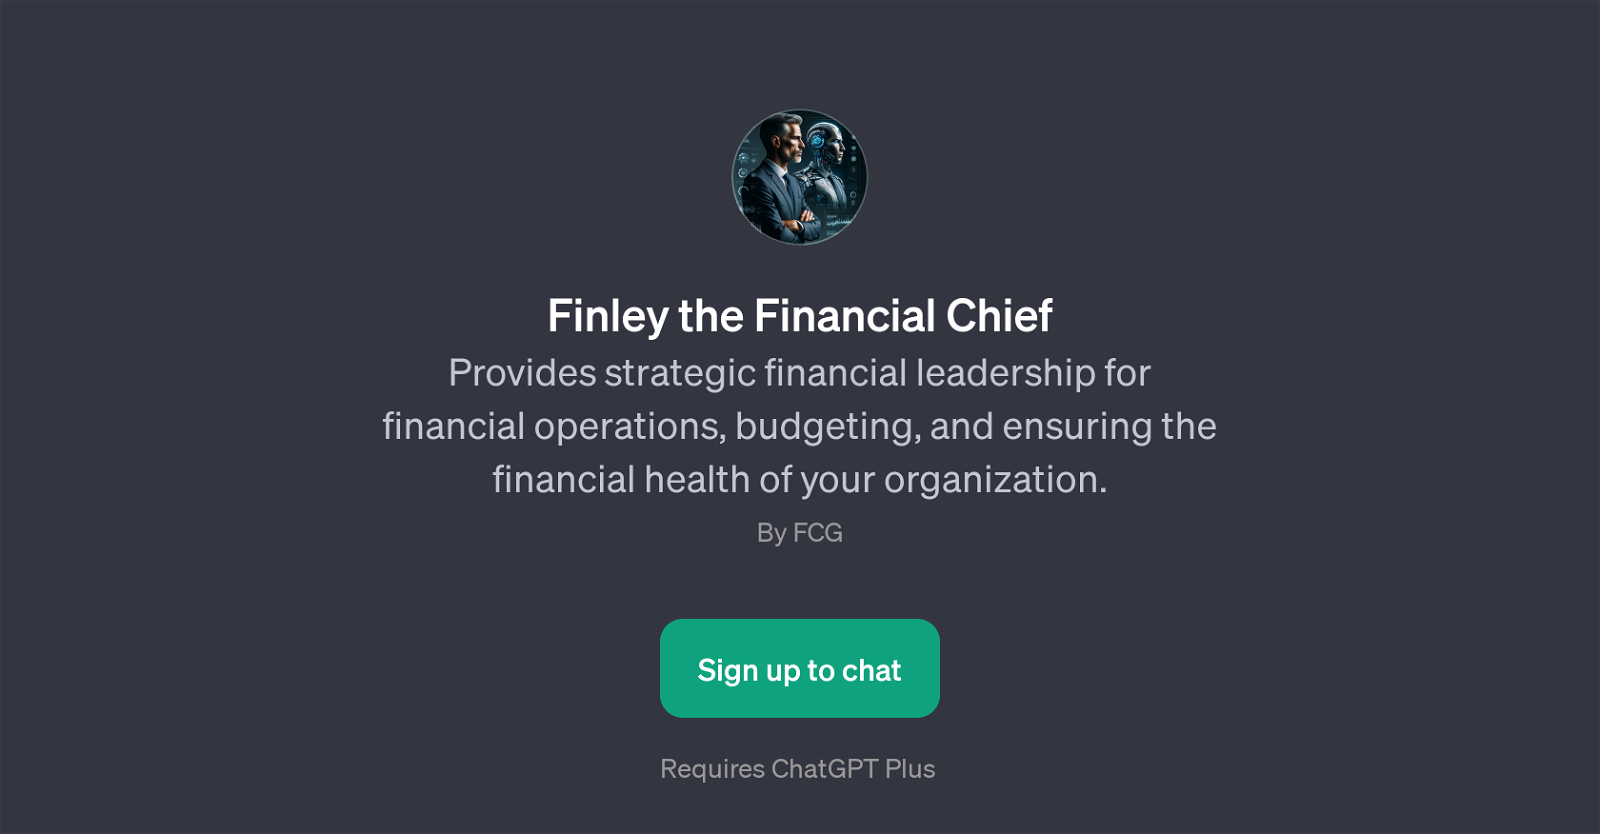 Finley the Financial Chief website